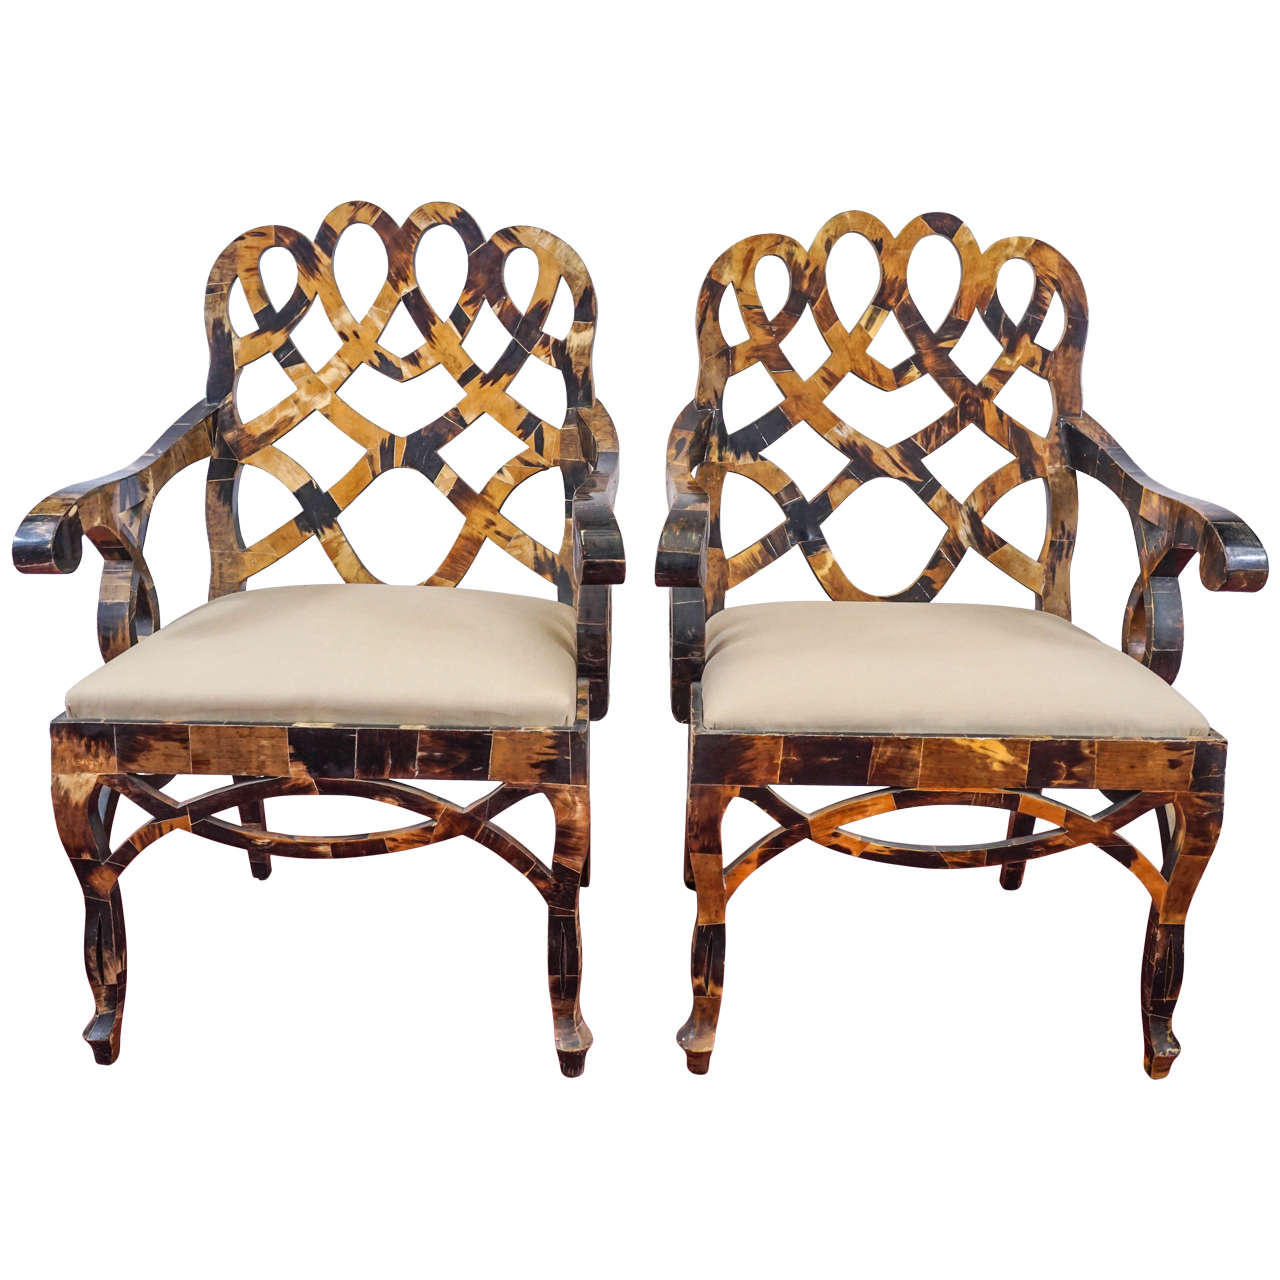 Pair of Tessellated Horn Chairs